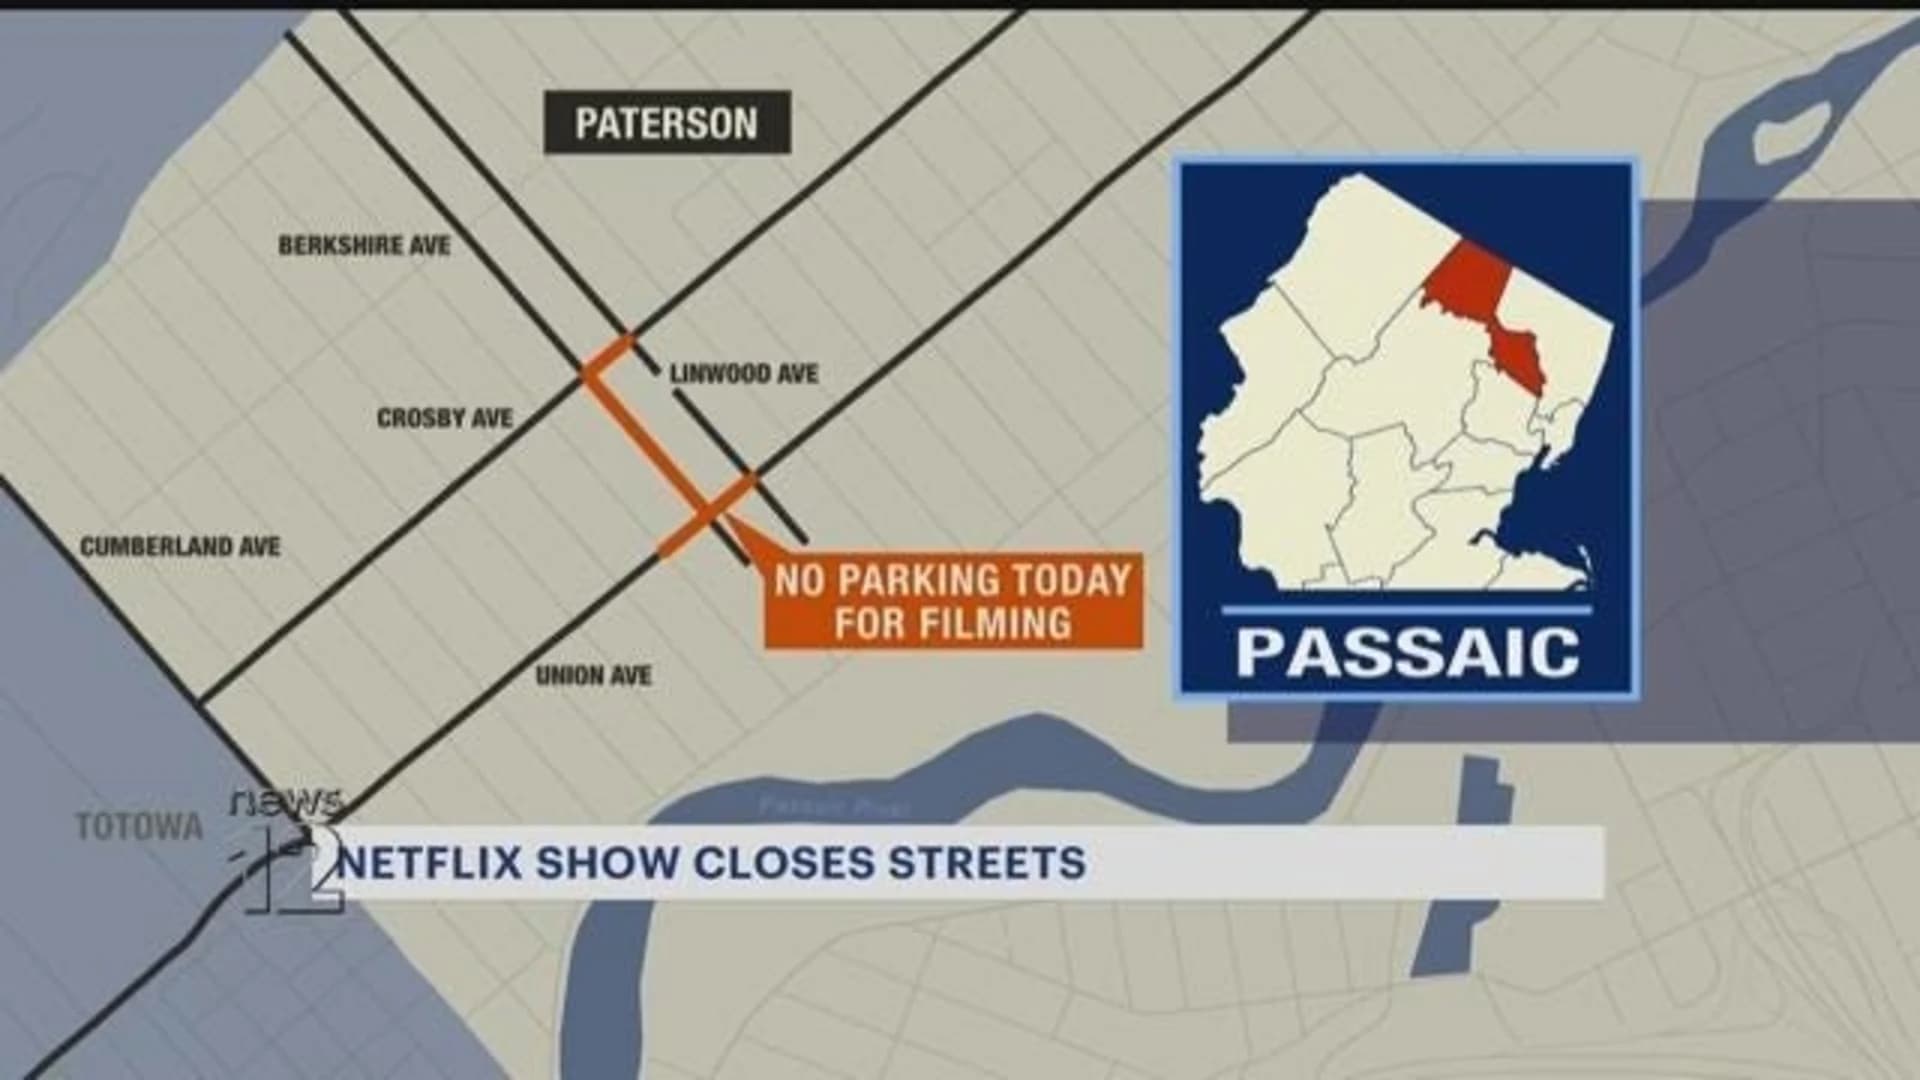 Hollywood takes over Paterson: Netflix filming scheduled this week